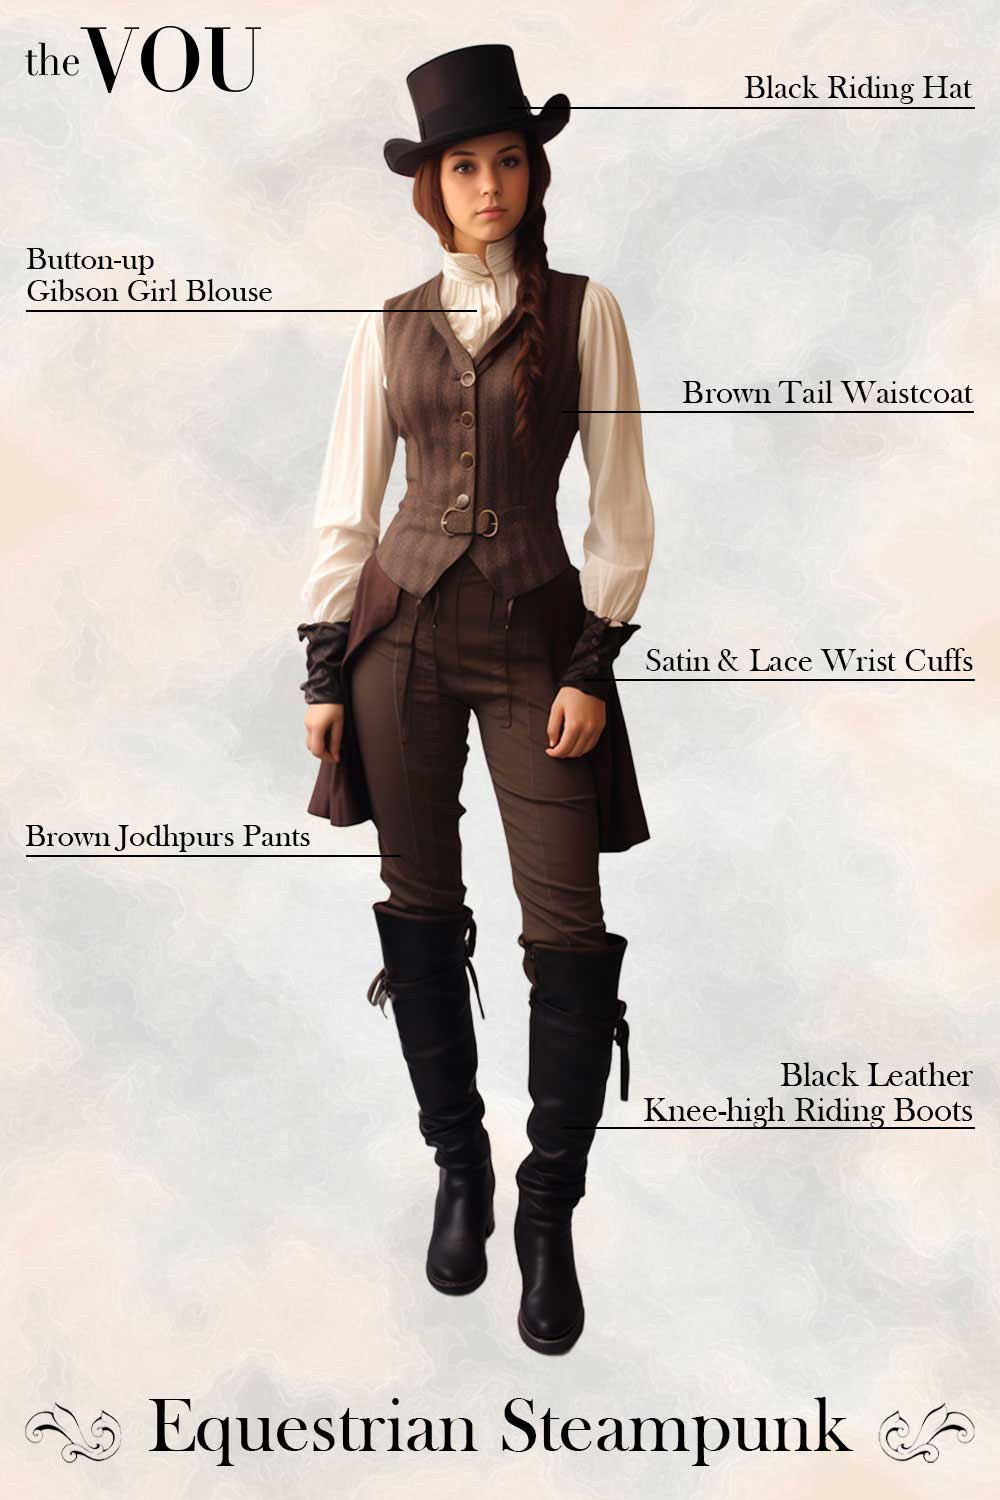 Equestrian Steampunk style outfit